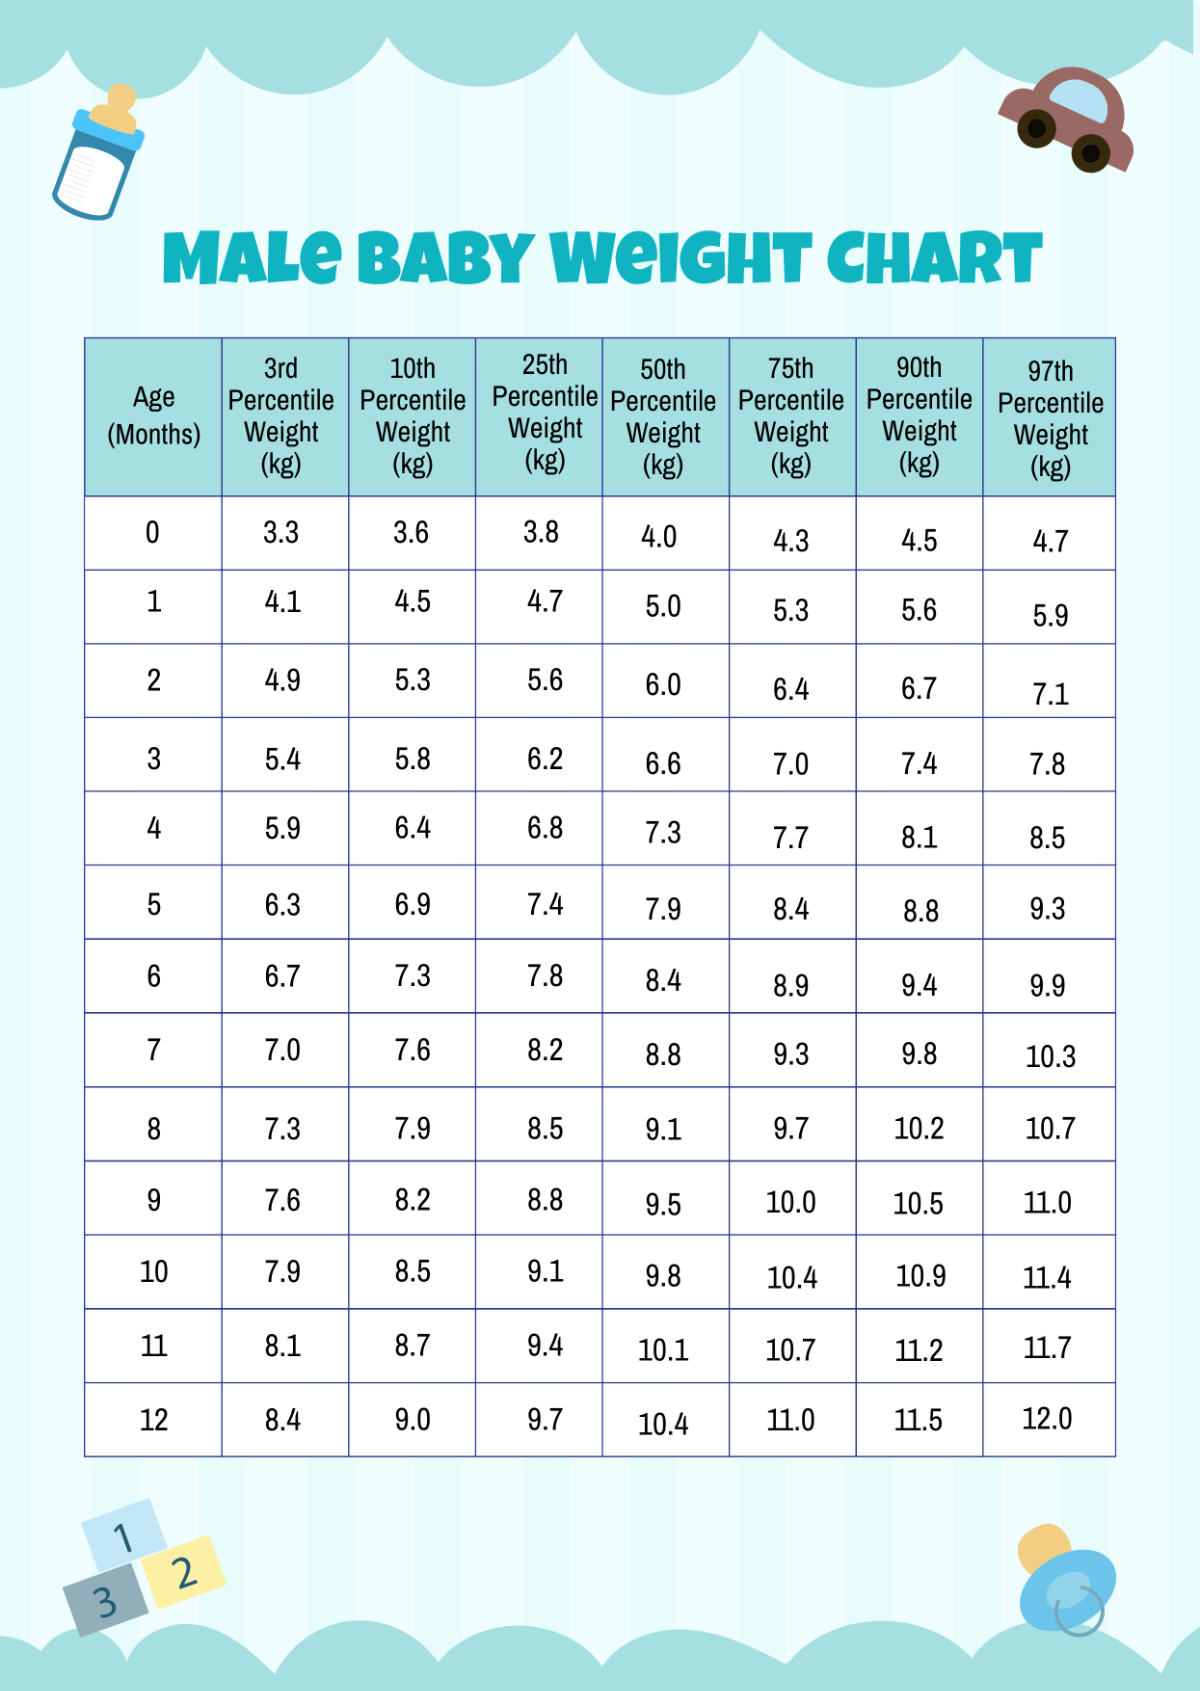 Male Baby Weight Chart